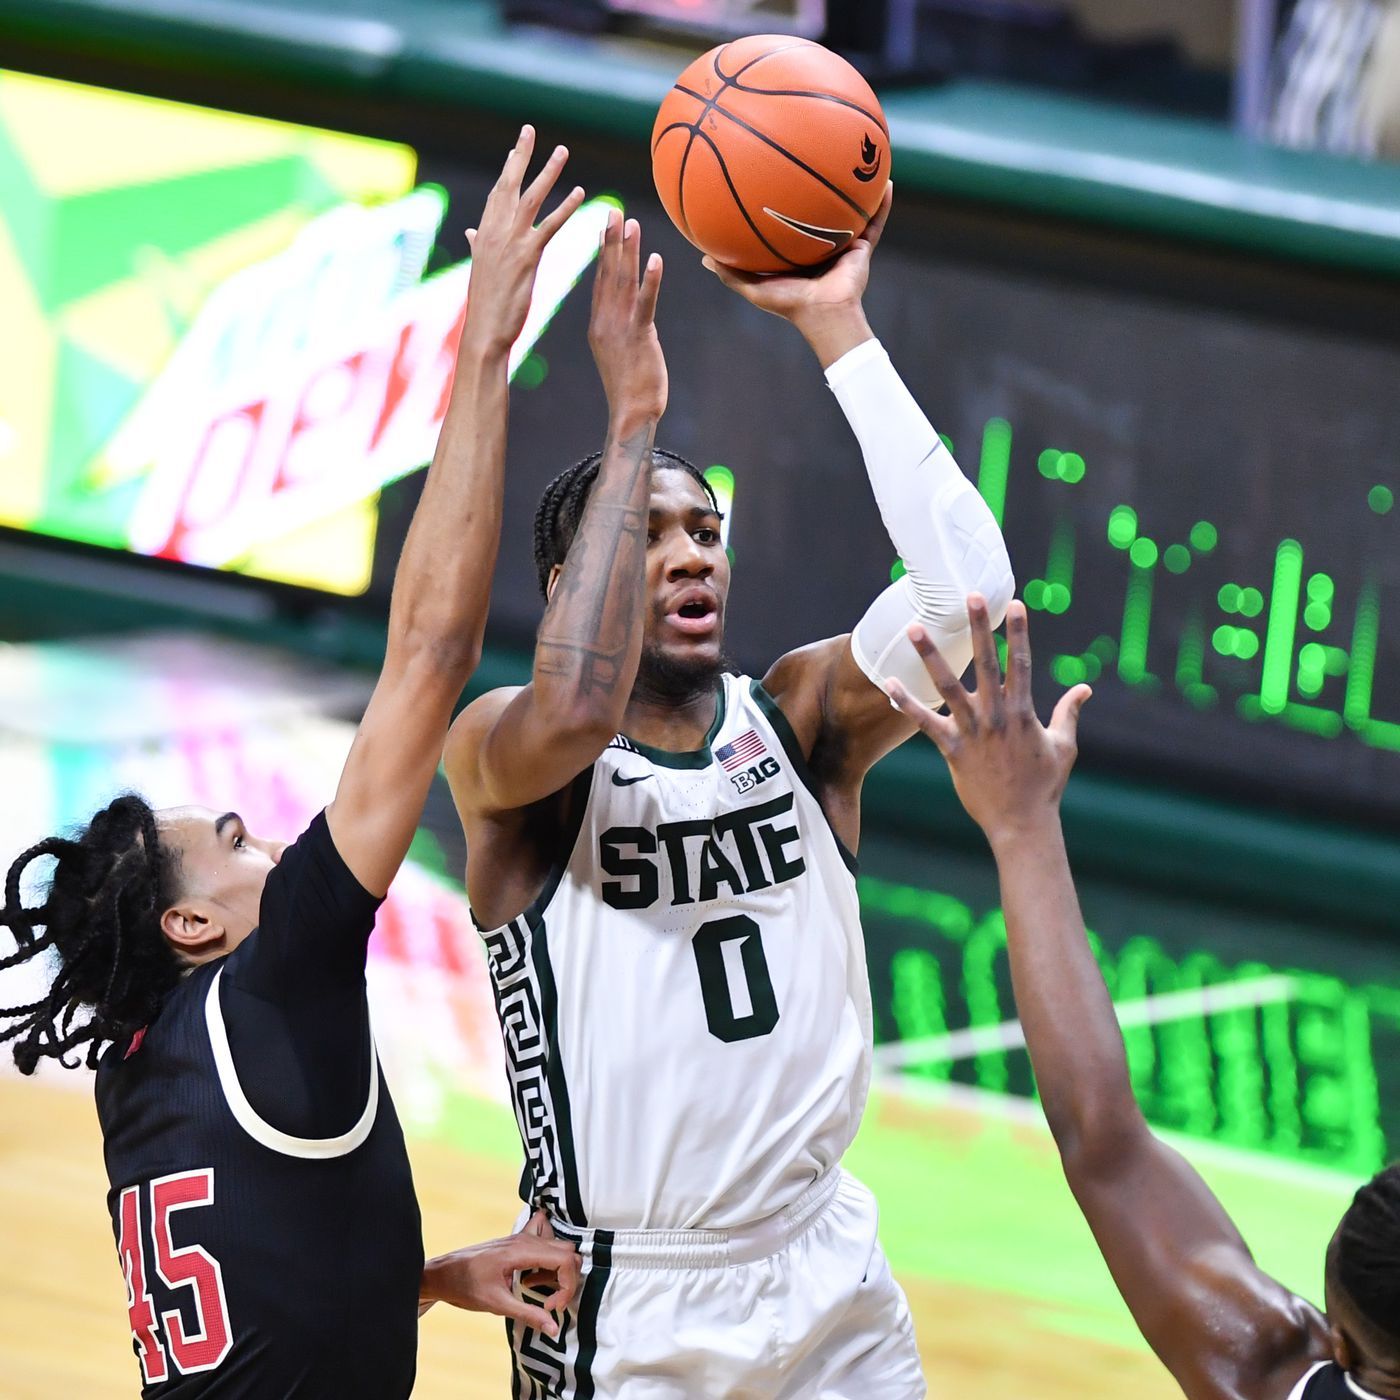 Msu Basketball Schedule 2022 Michigan State Men's Basketball: 2021-'22 Tv Schedule Released - The Only  Colors